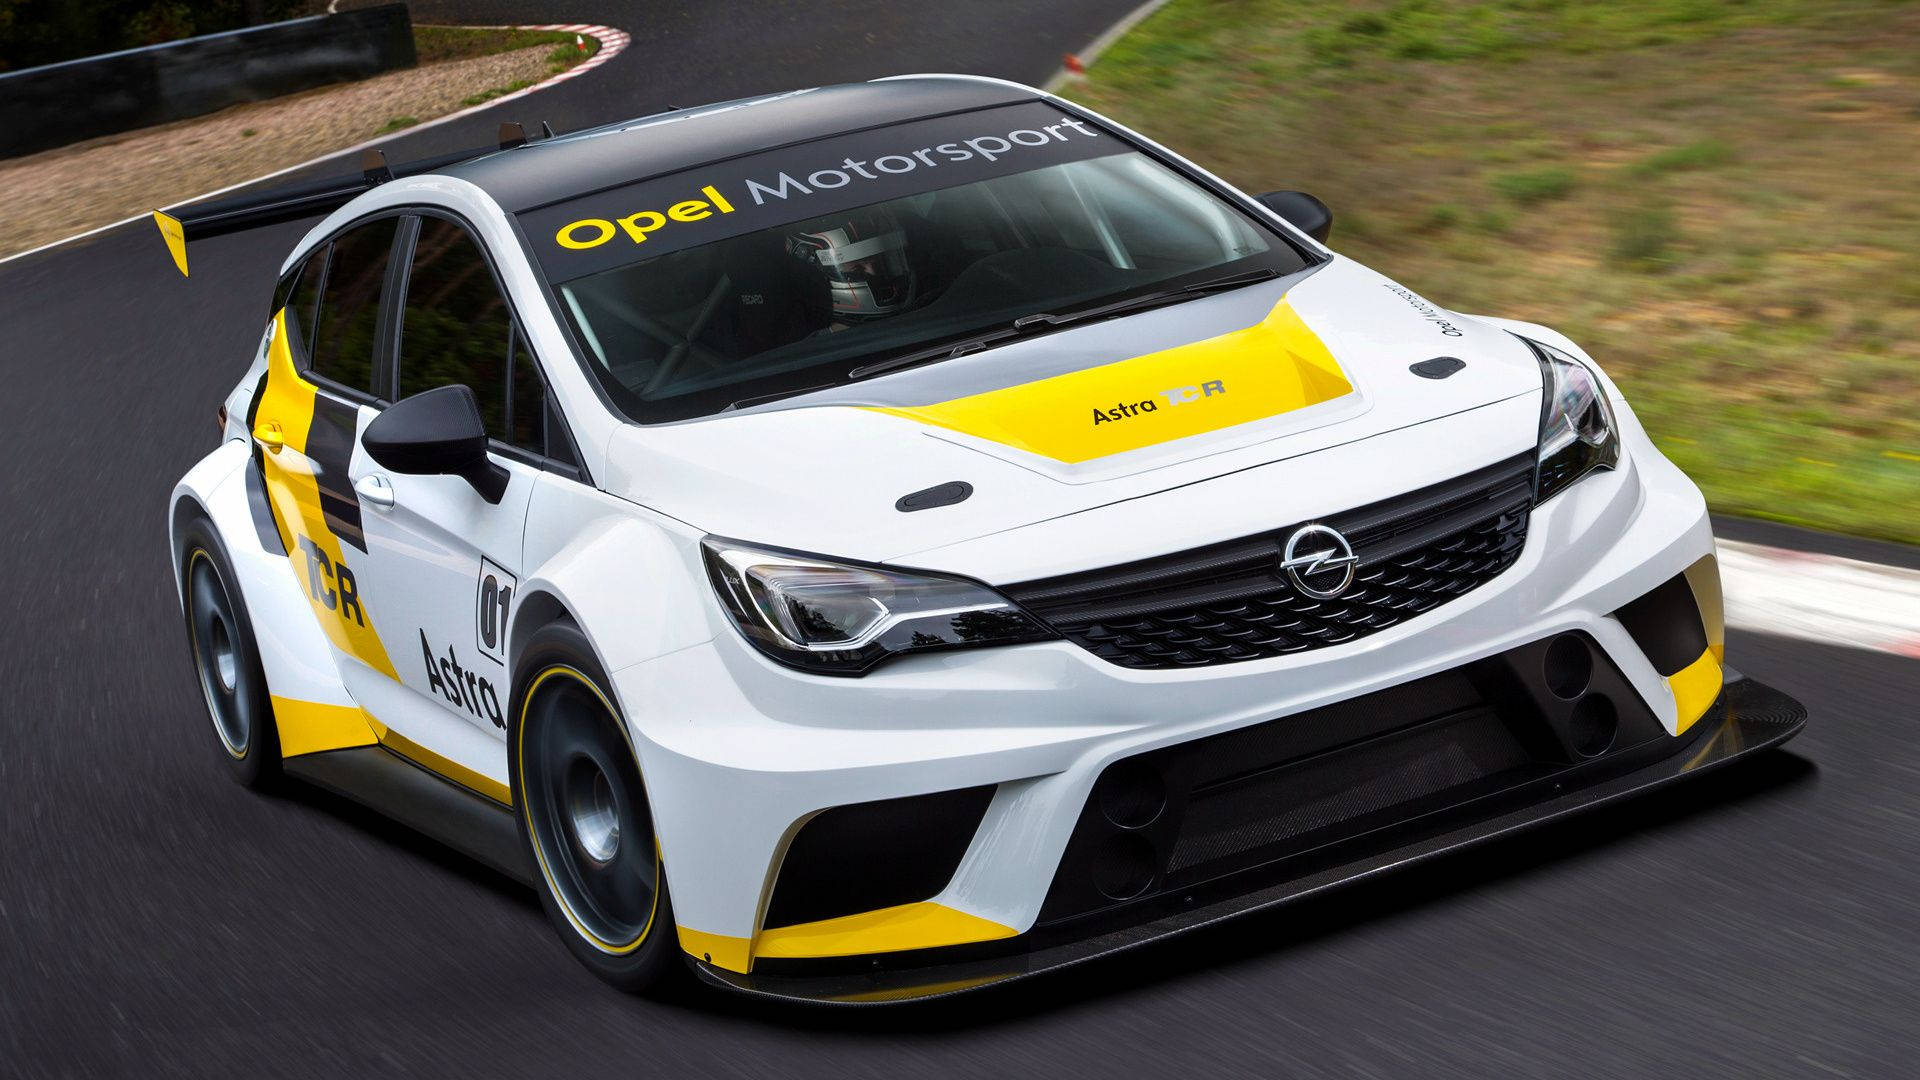 Opel Astra Tcr Background